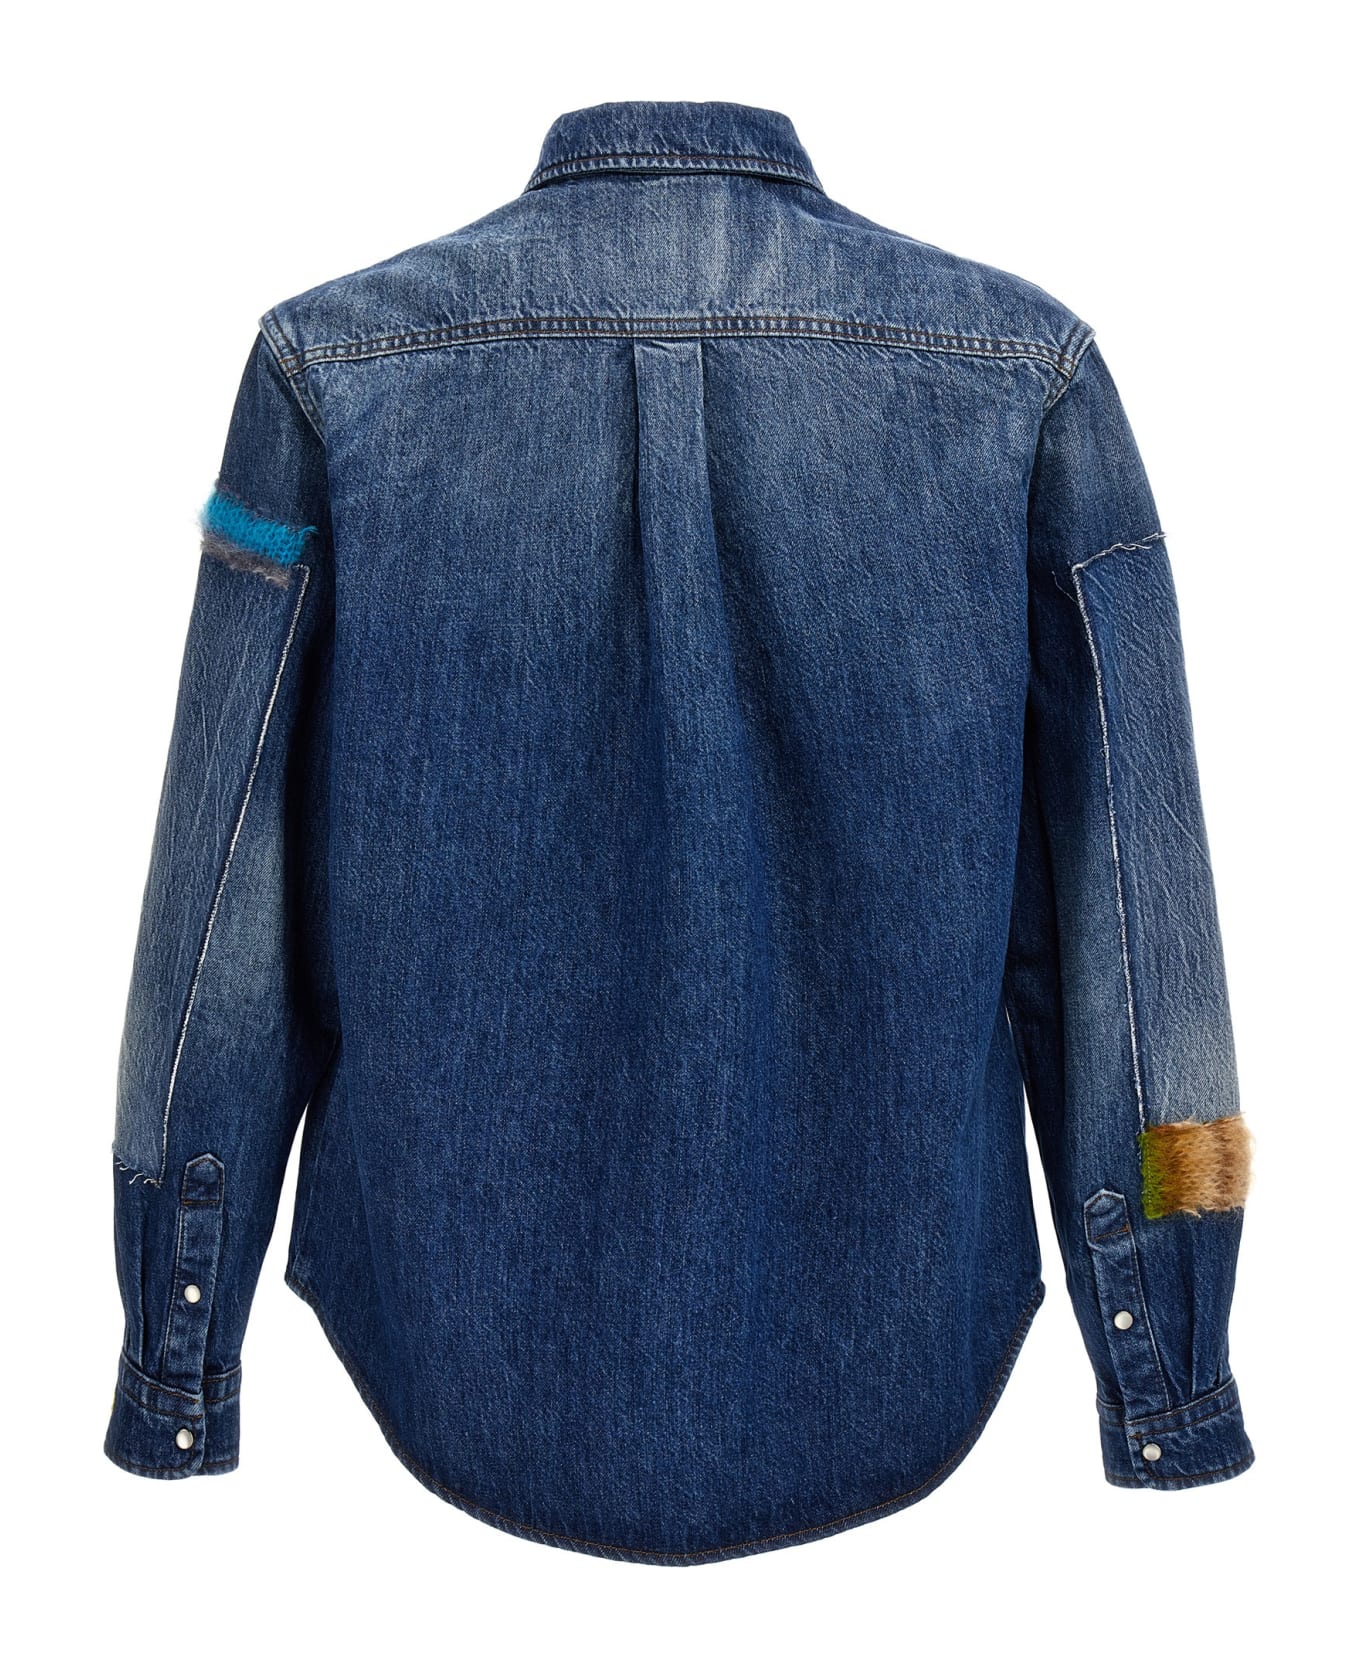 Marni Denim Shirt, Embroidery And Patches - BLUE/MULTICOLOUR